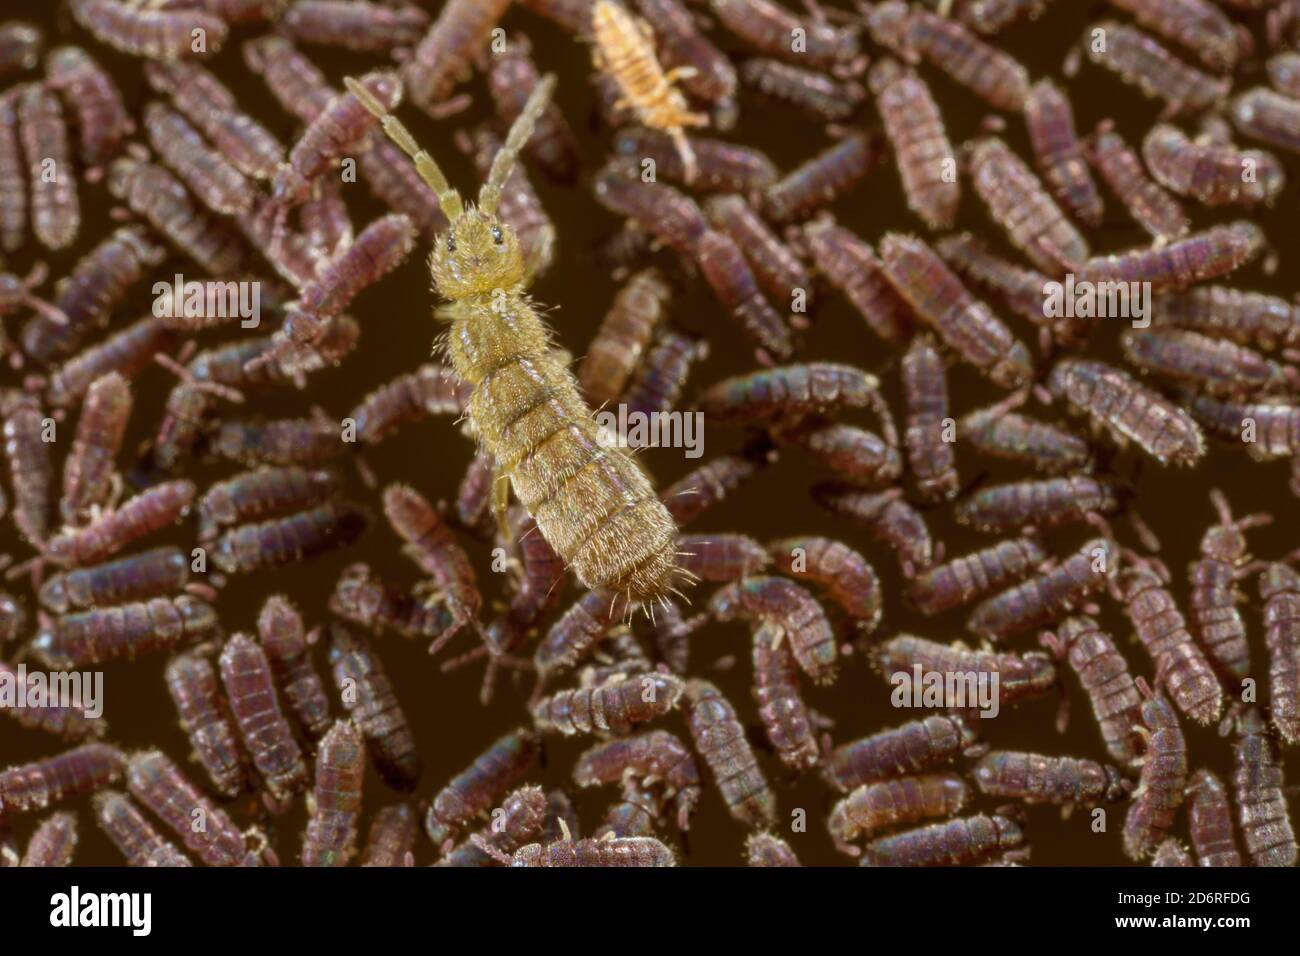 common black freshwater springtail (Podura aquatica), with springtail on another species, Germany Stock Photo